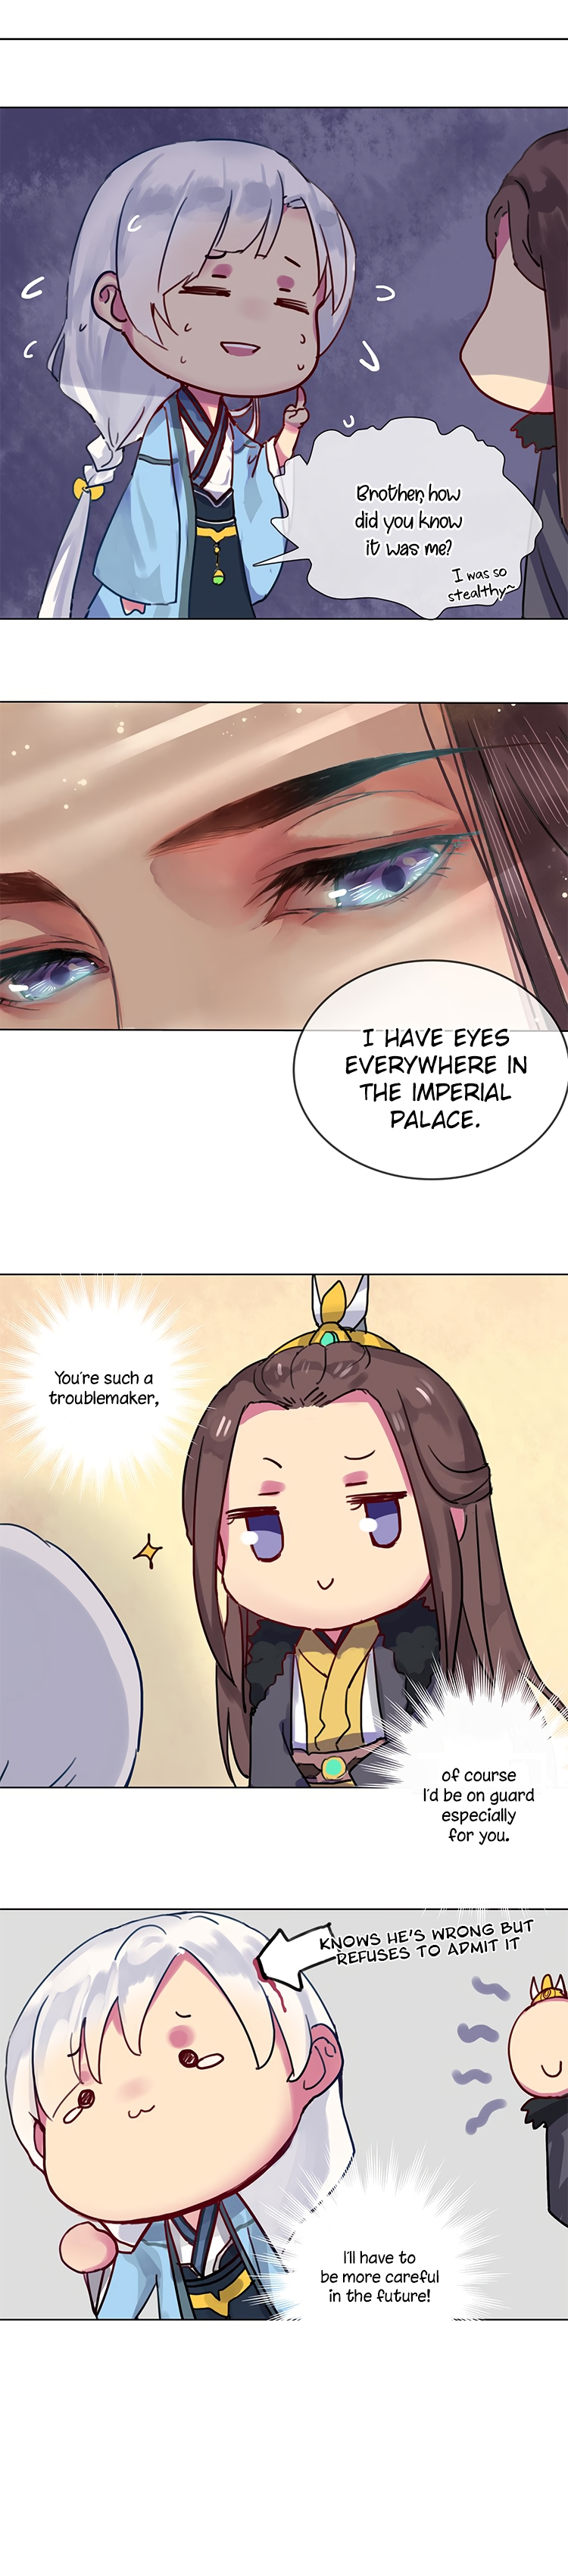 I'm Becoming A Master Of The Imperial Palace! - Page 2